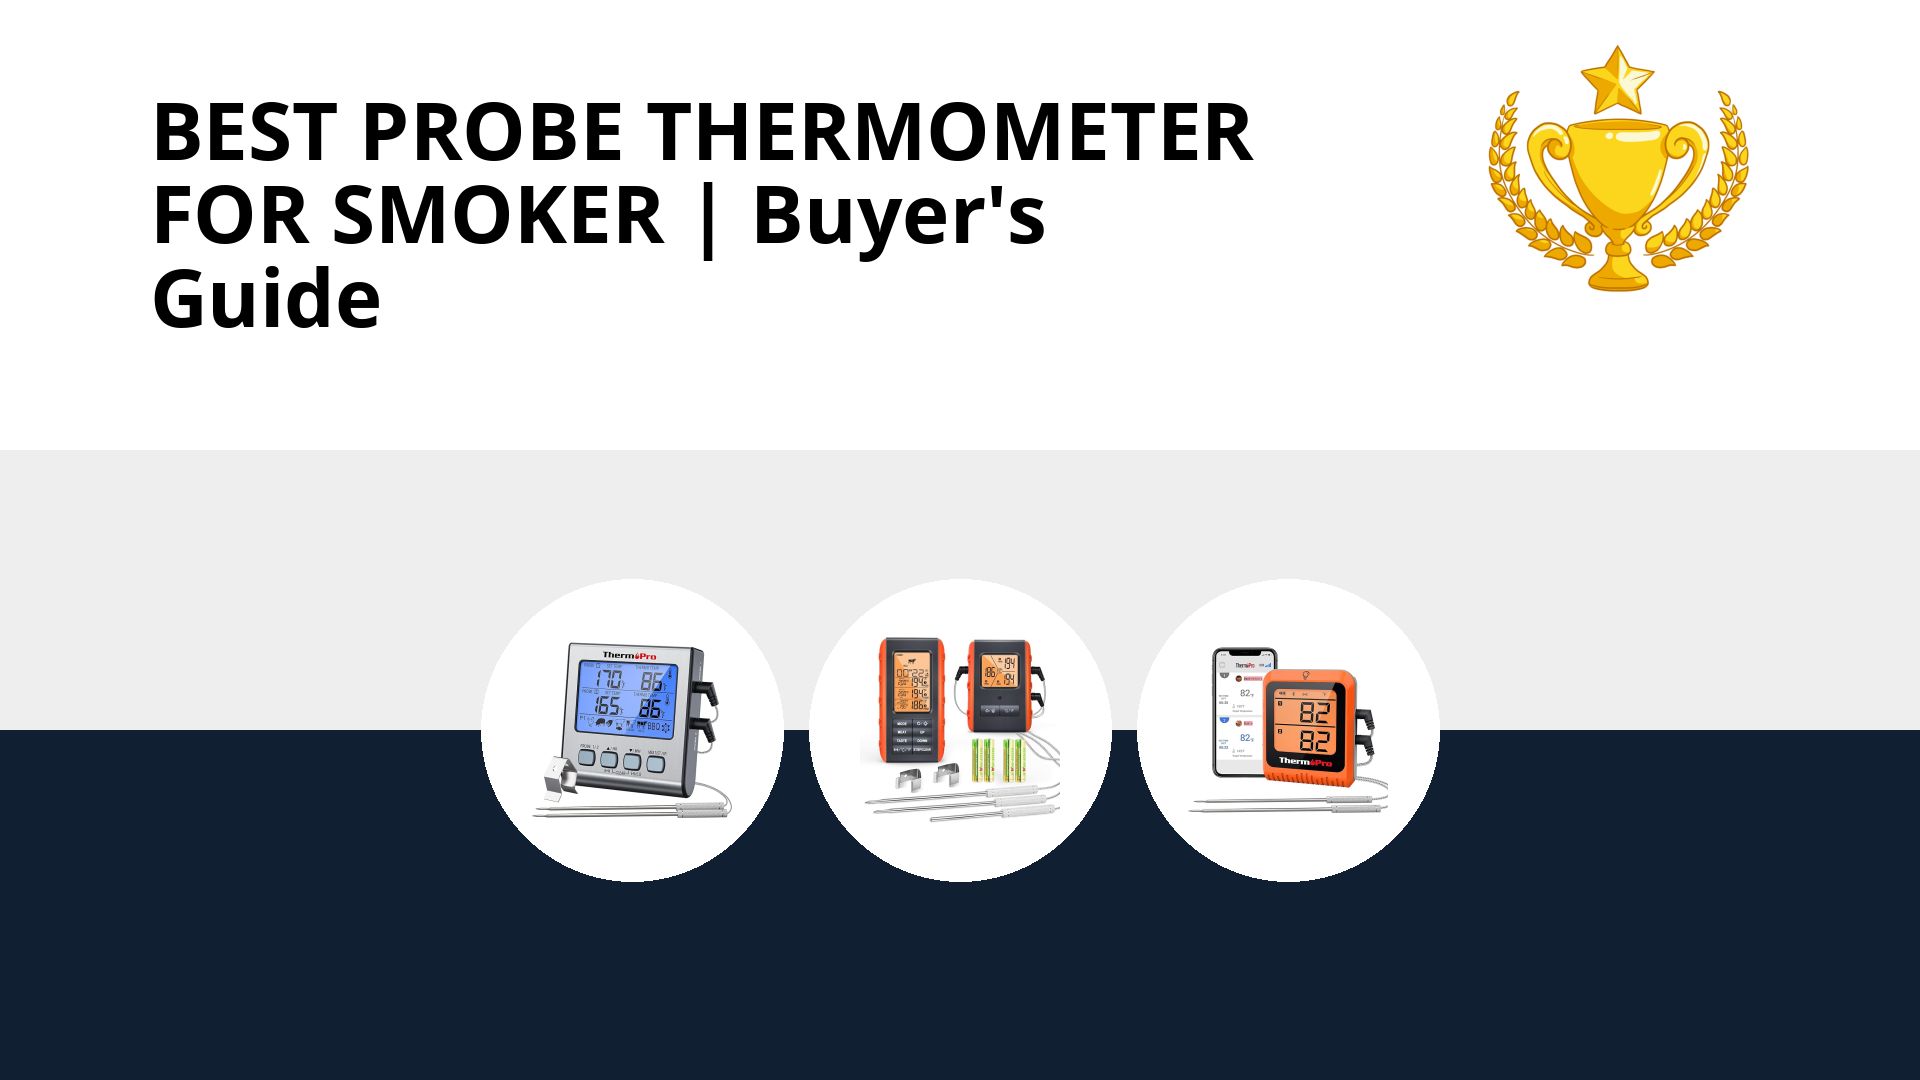 Best Probe Thermometer For Smoker: image